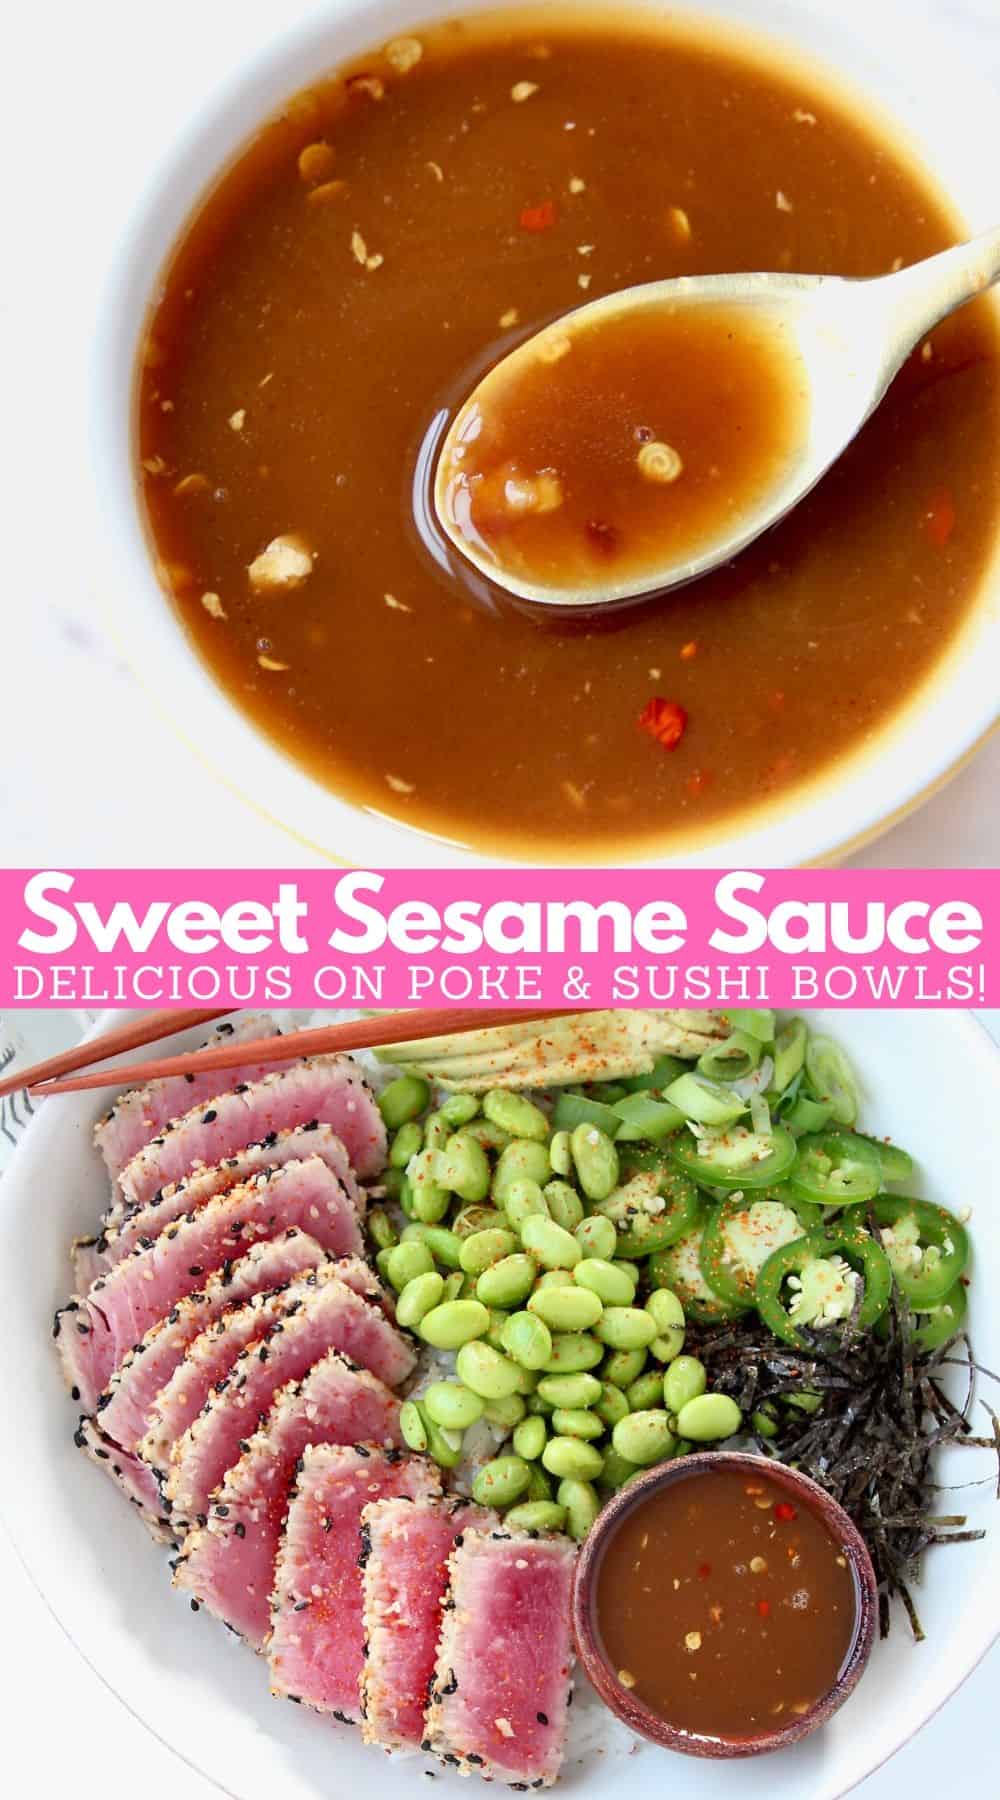 Asian Sweet Sesame Sauce Recipe - Bowls Are The New Plates